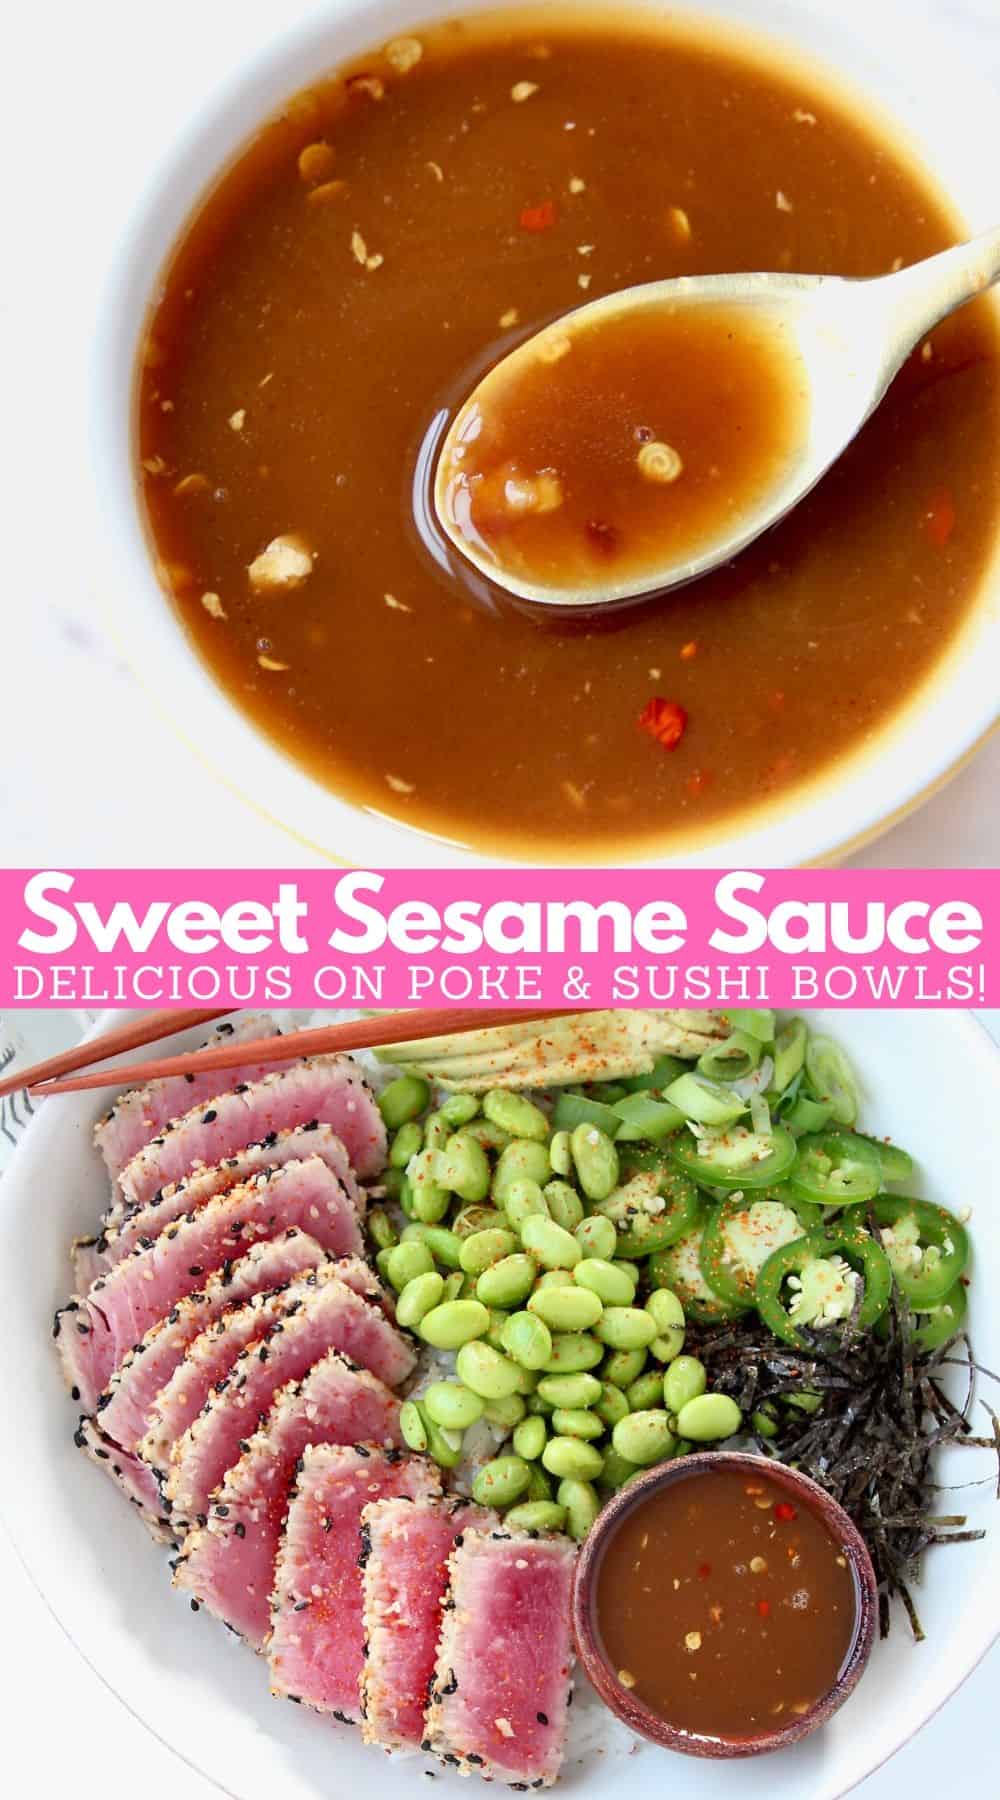 Asian Sweet Sesame Sauce Recipe - Bowls Are The New Plates